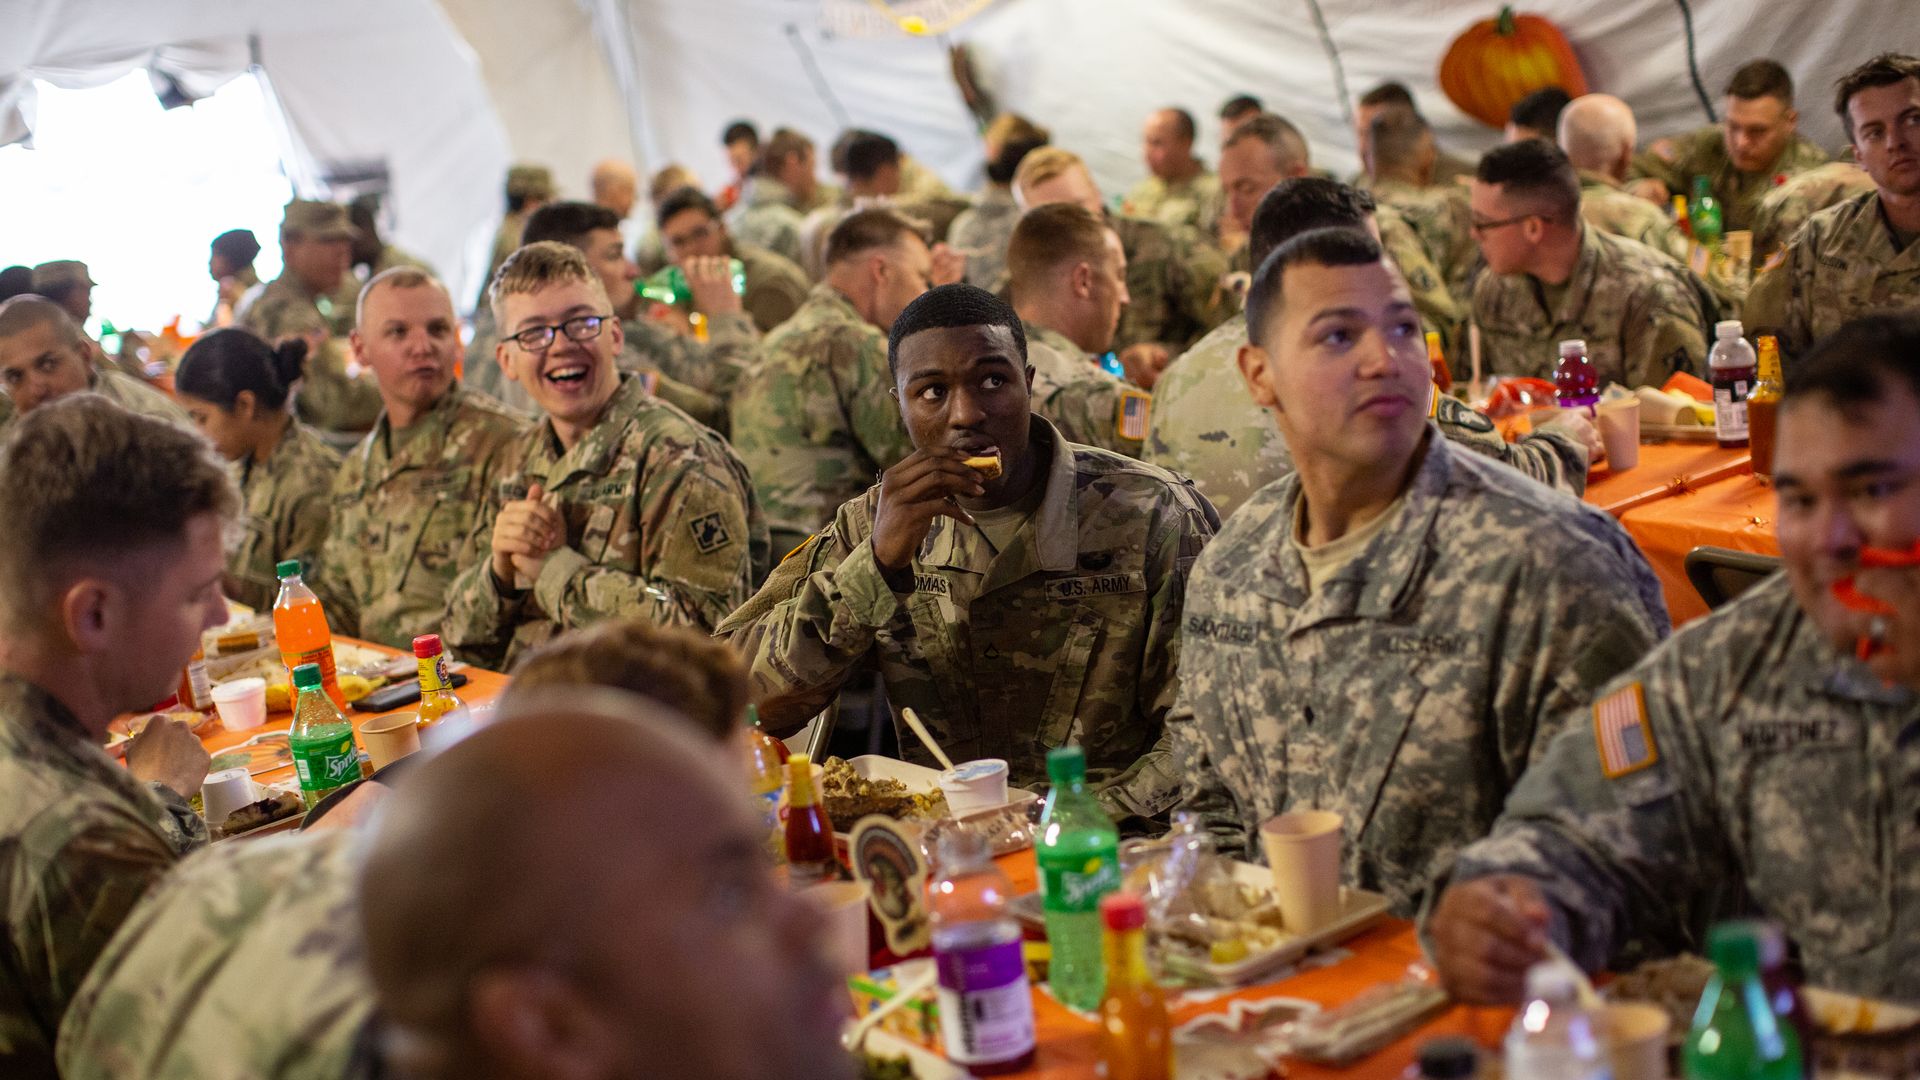 Troops eat Thanksgiving meal at southern border.